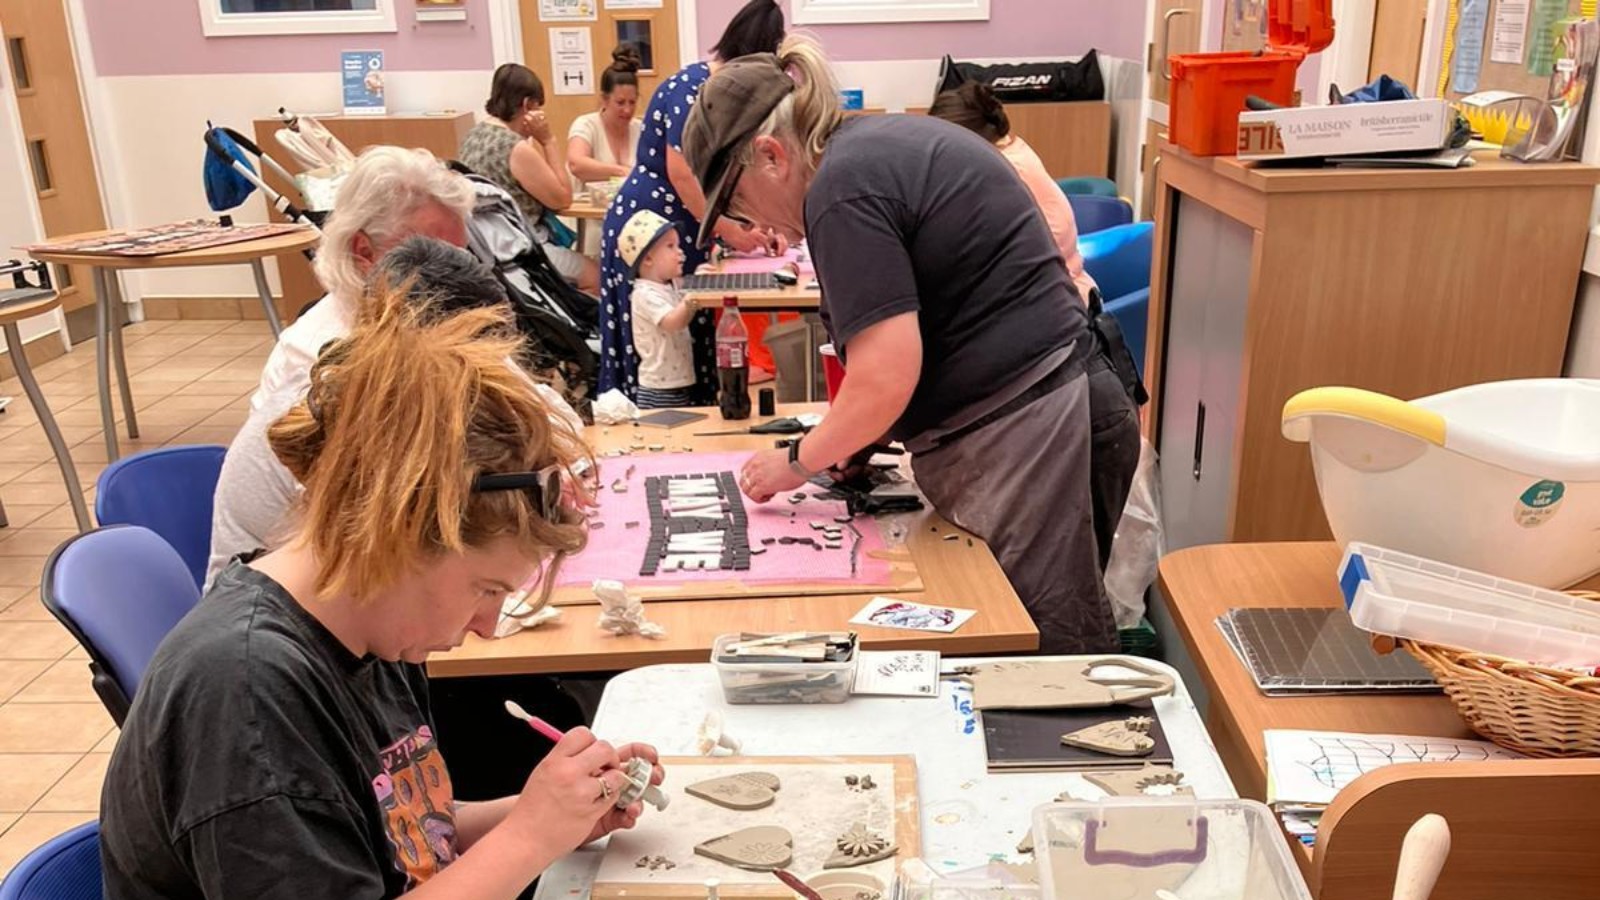 A group of adults around a table, making objects in a craft workshop